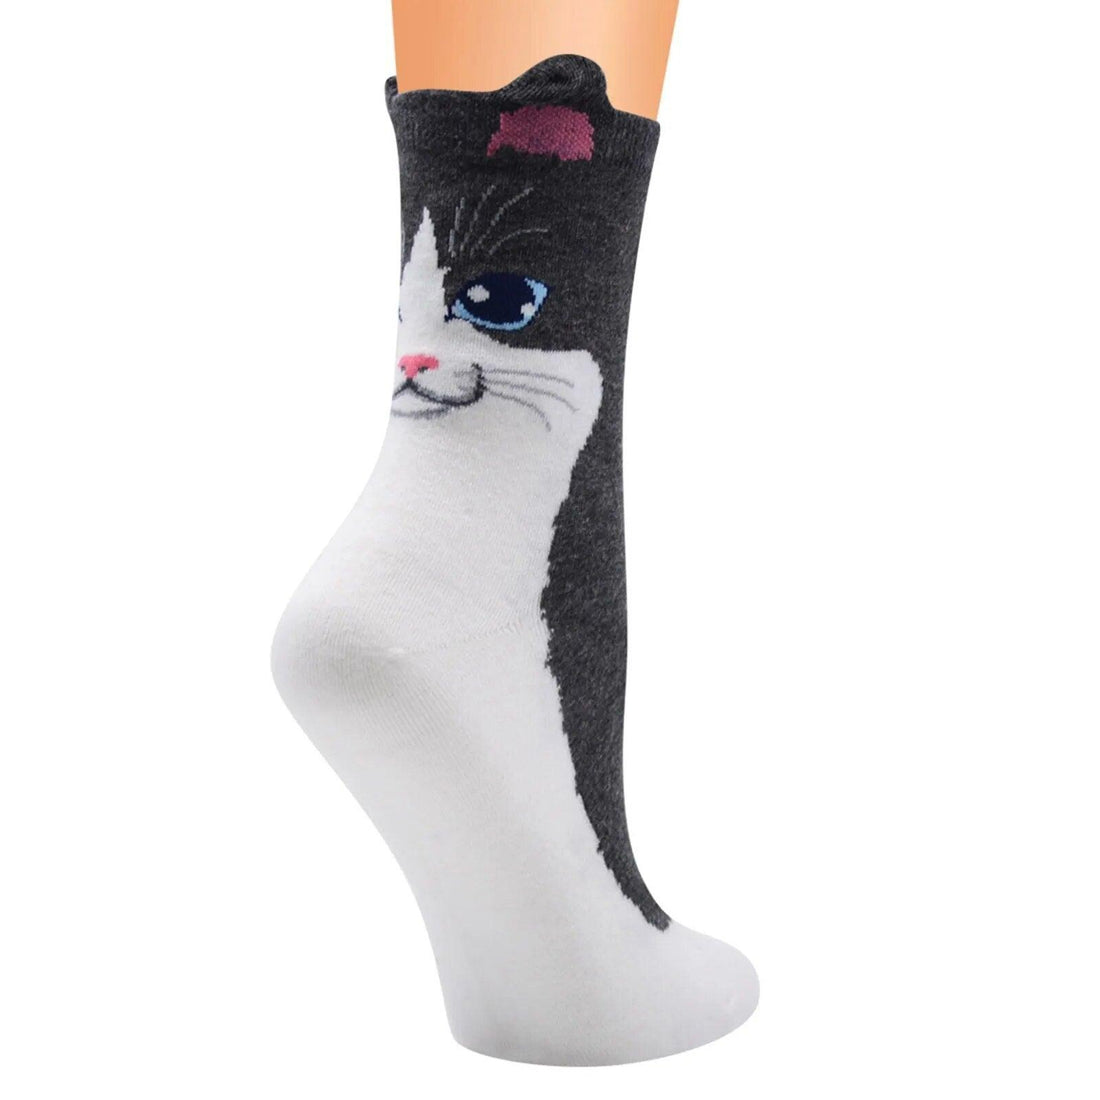 Cute Cartoon Cat Socks, 14 Designs - Just Cats - Gifts for Cat Lovers